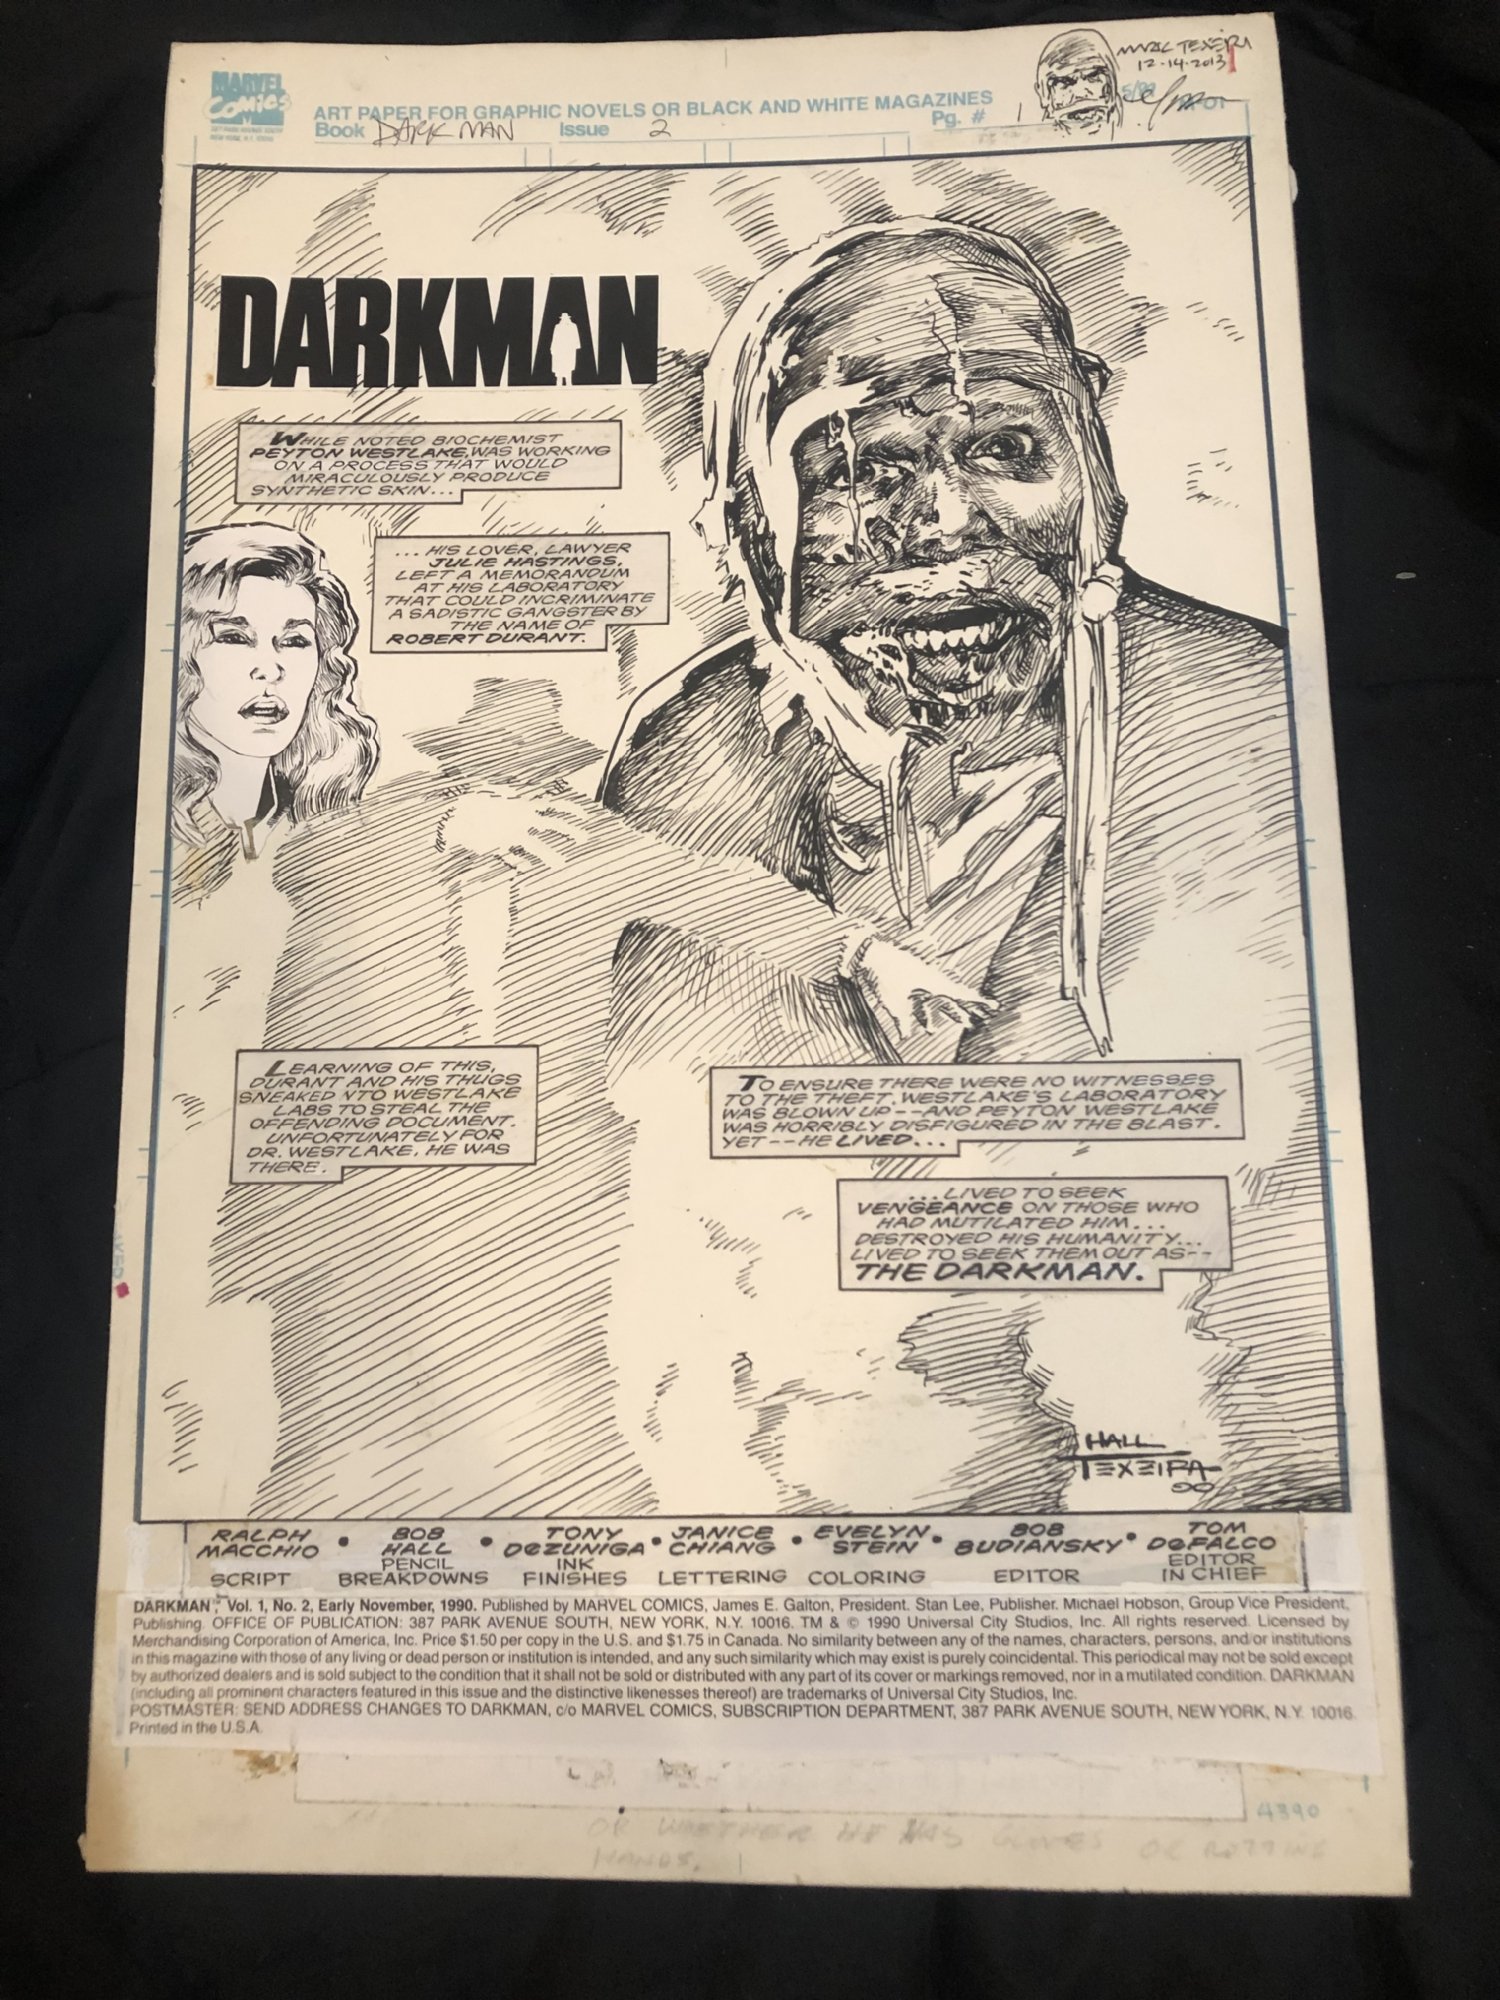 Anthony's Comic Book Art :: Original Comic Art For Sale by Mark Texeira